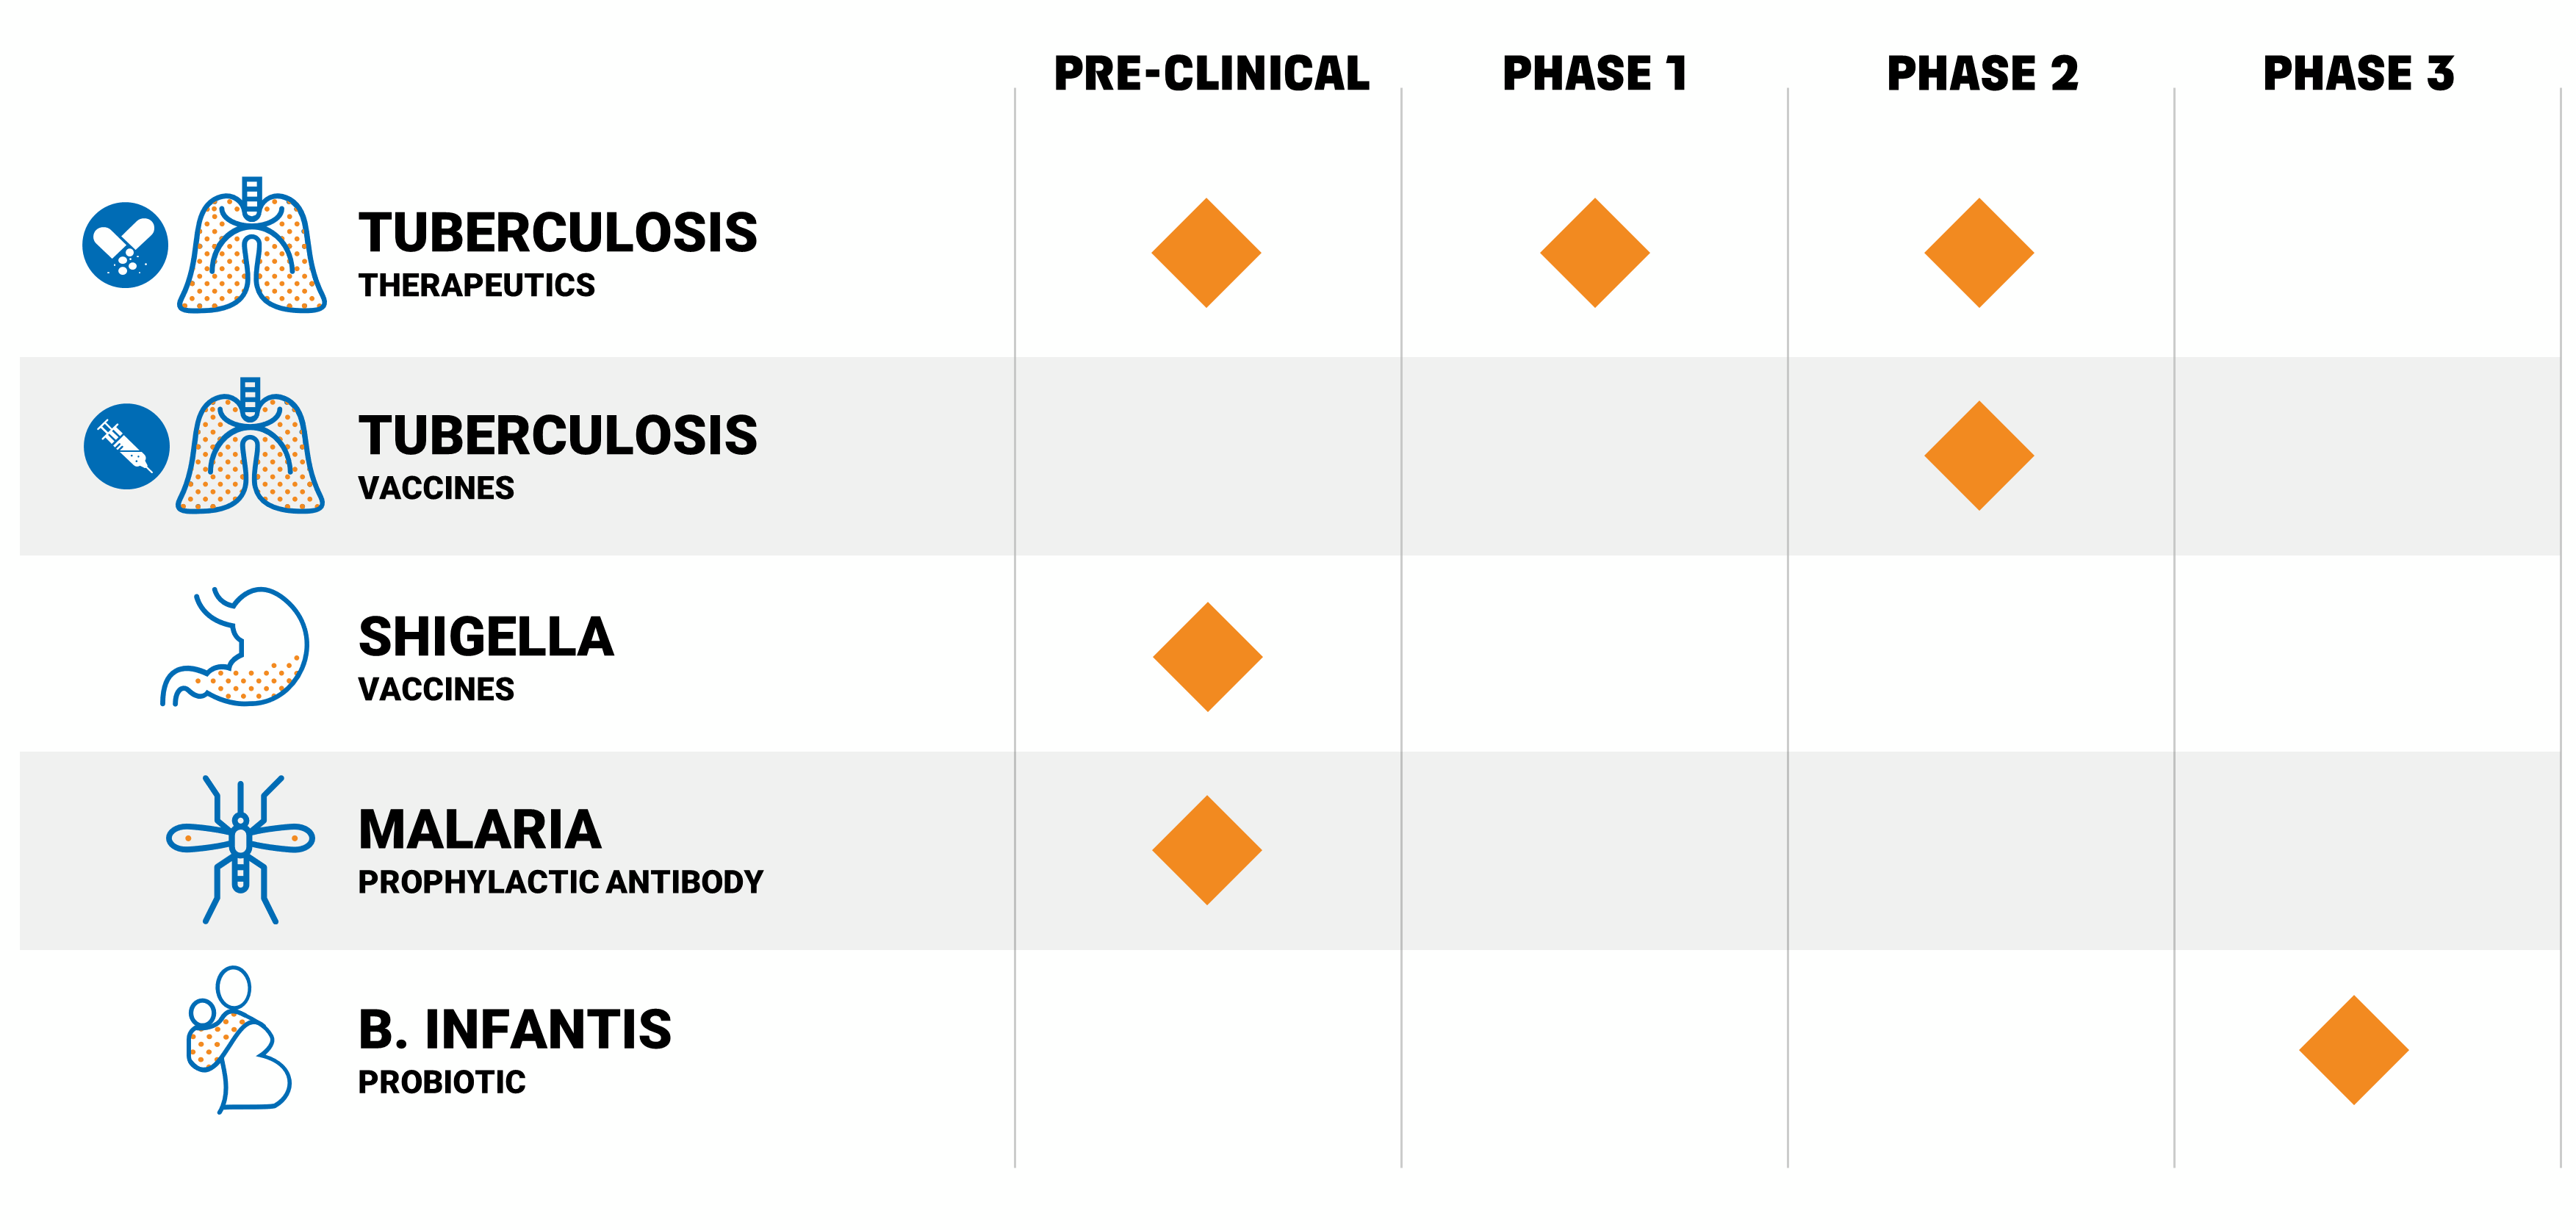 Tuberculosis Therapeutics: Pre-clinical, Phase 1, and Phase 2. Tuberculosis Vaccines: Phase 2. Shigella Vaccines: Pre-clinical. Malaria Prophylactic Antibody: Pre-clinical. B. Infantis Probiotic: Phase 3.